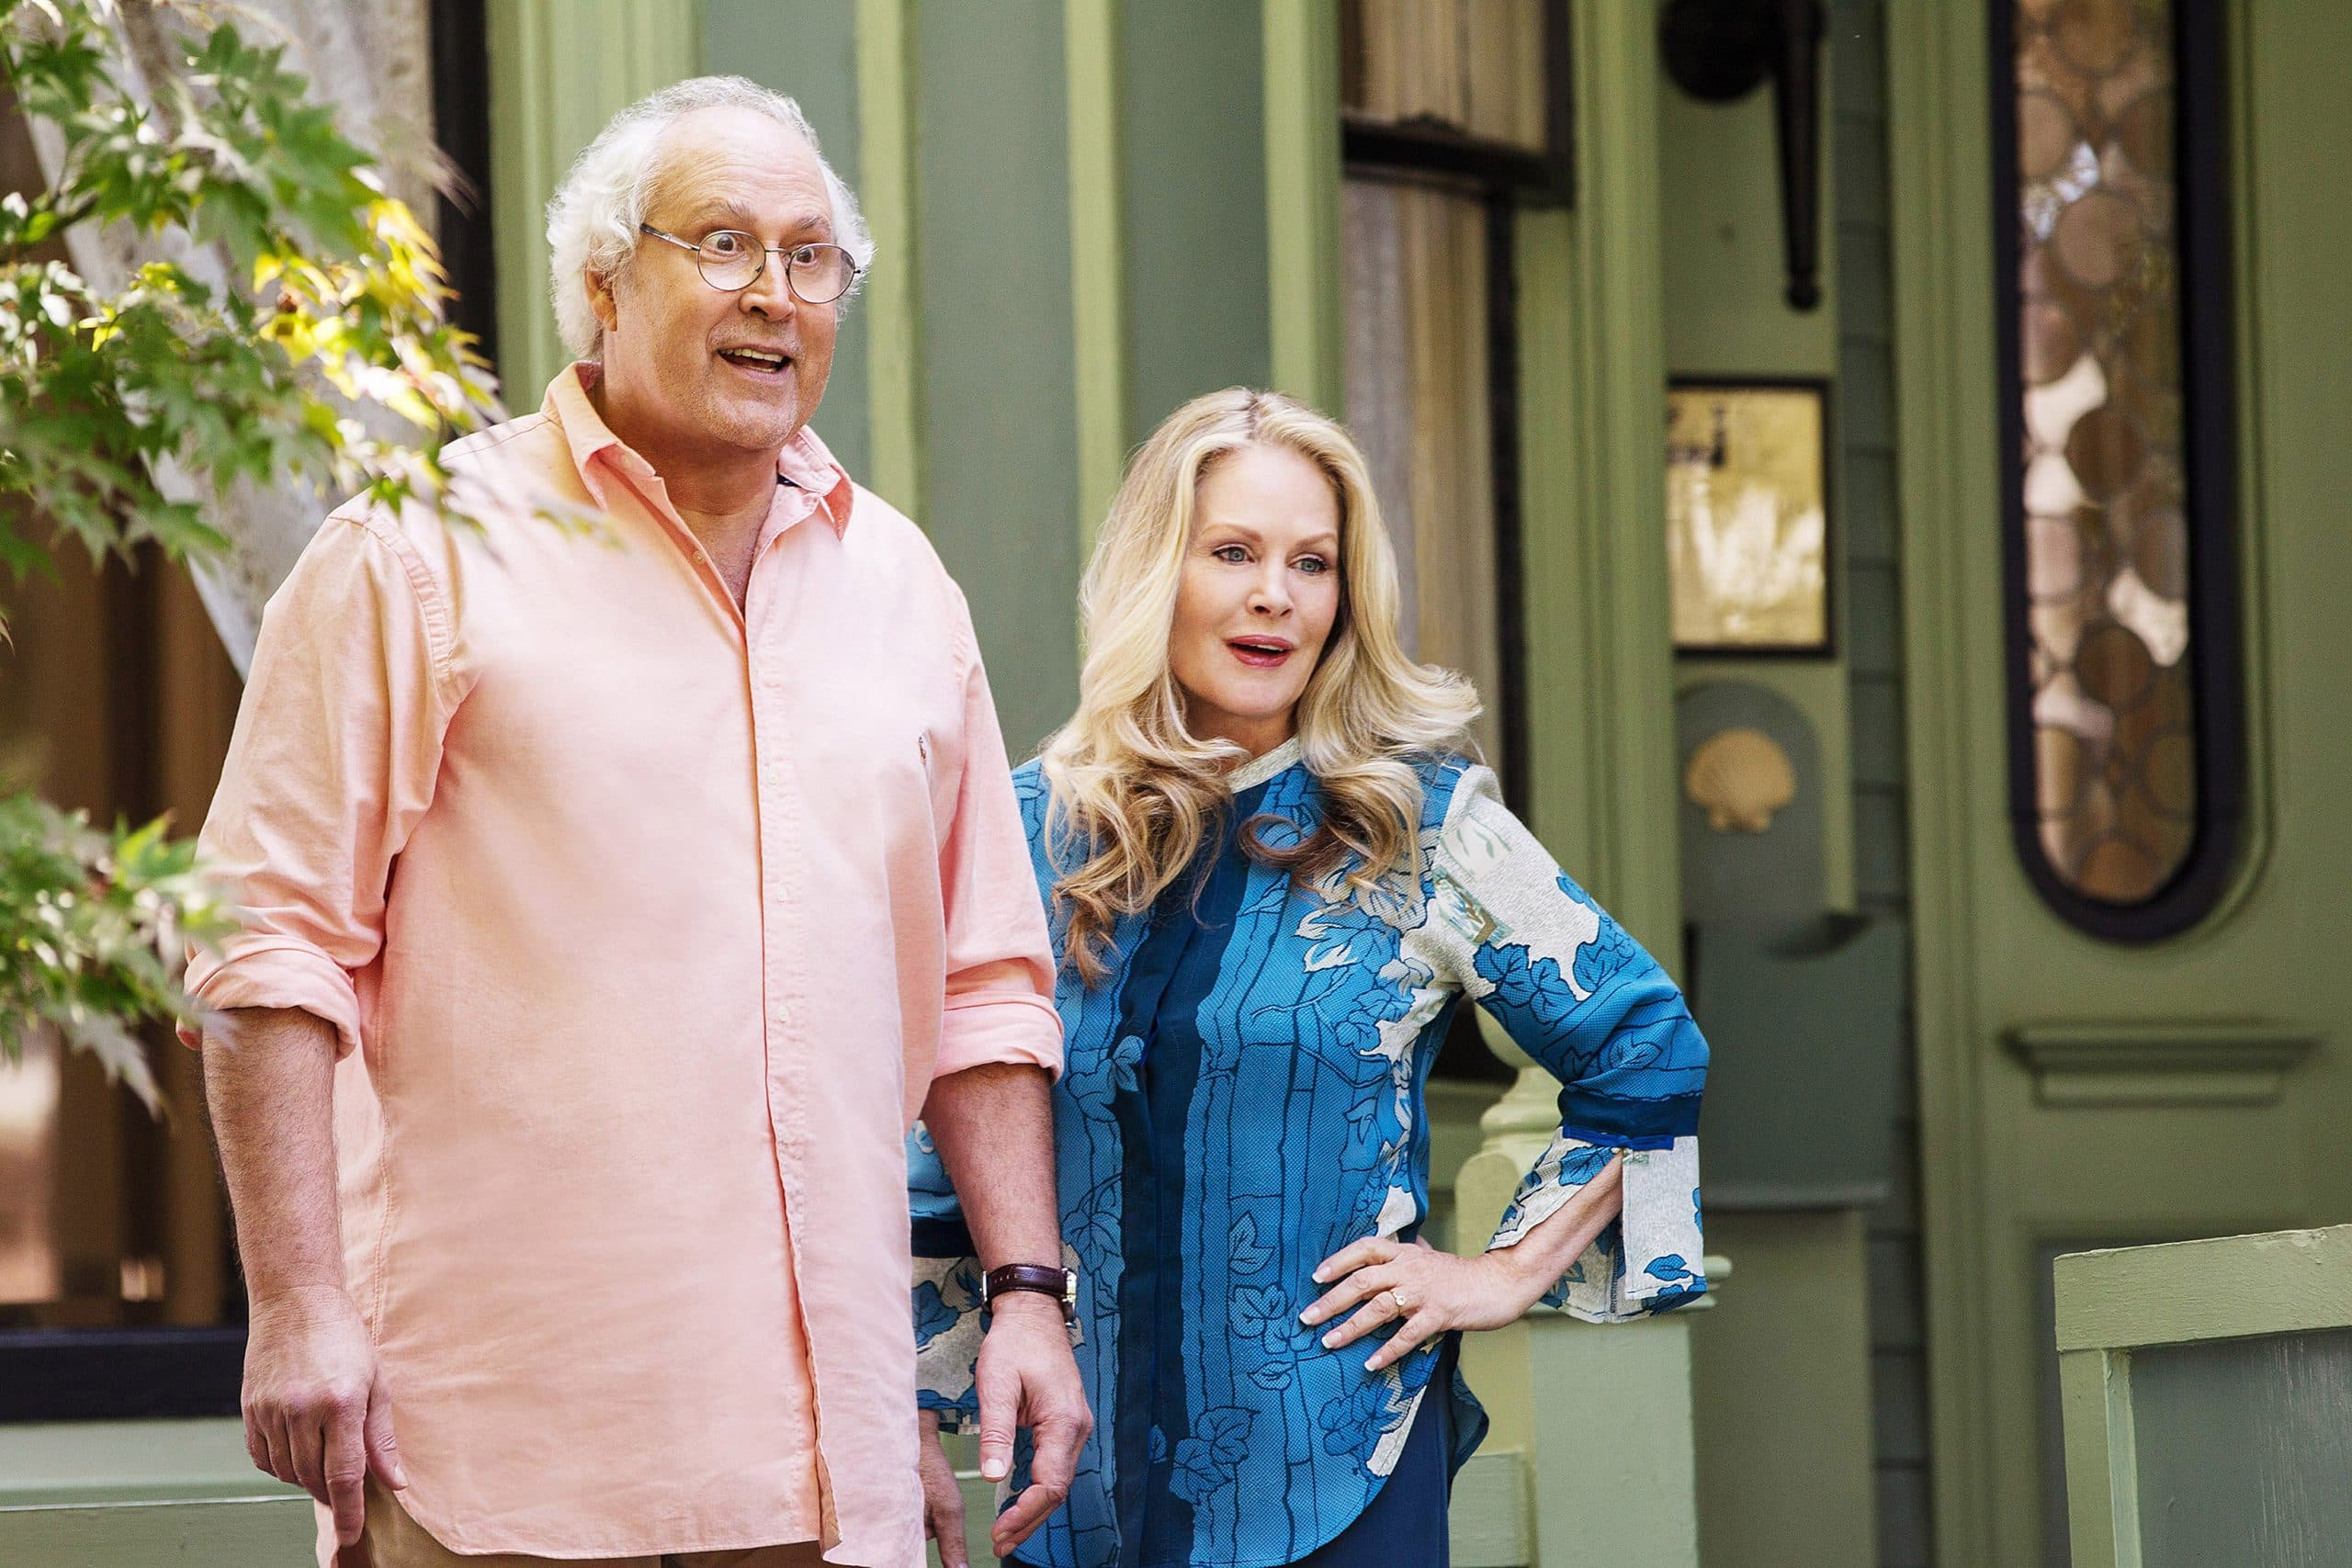 VACATION, from left: Chevy Chase, Beverly D'Angelo, 2015